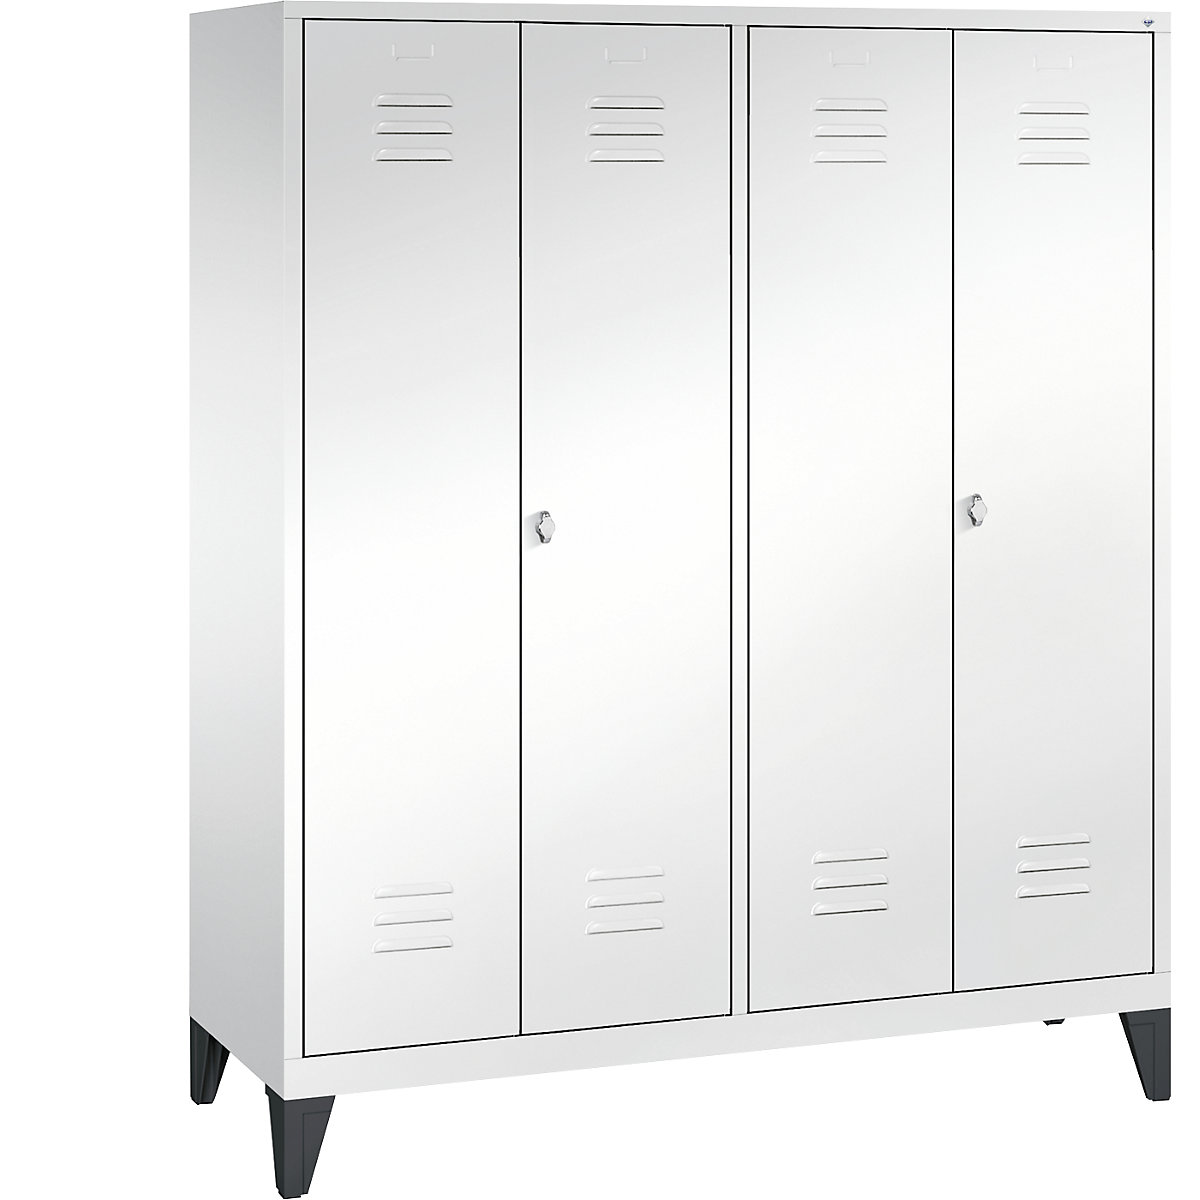 CLASSIC cloakroom locker with feet, doors close in the middle – C+P